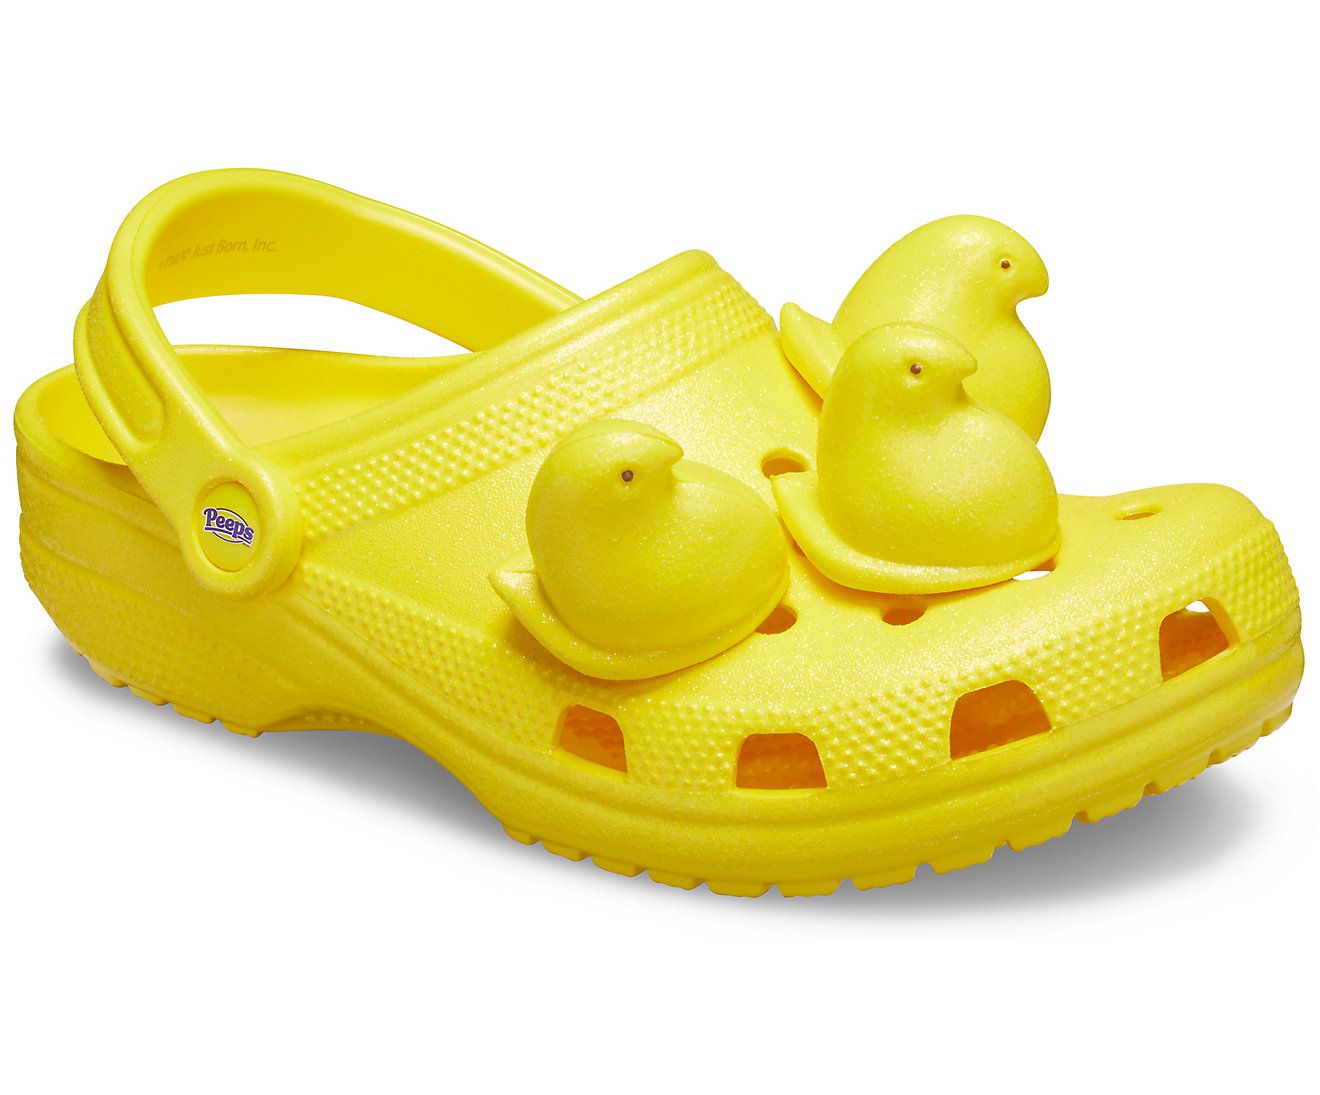 Peeps Crocs Are the New Must-Have 